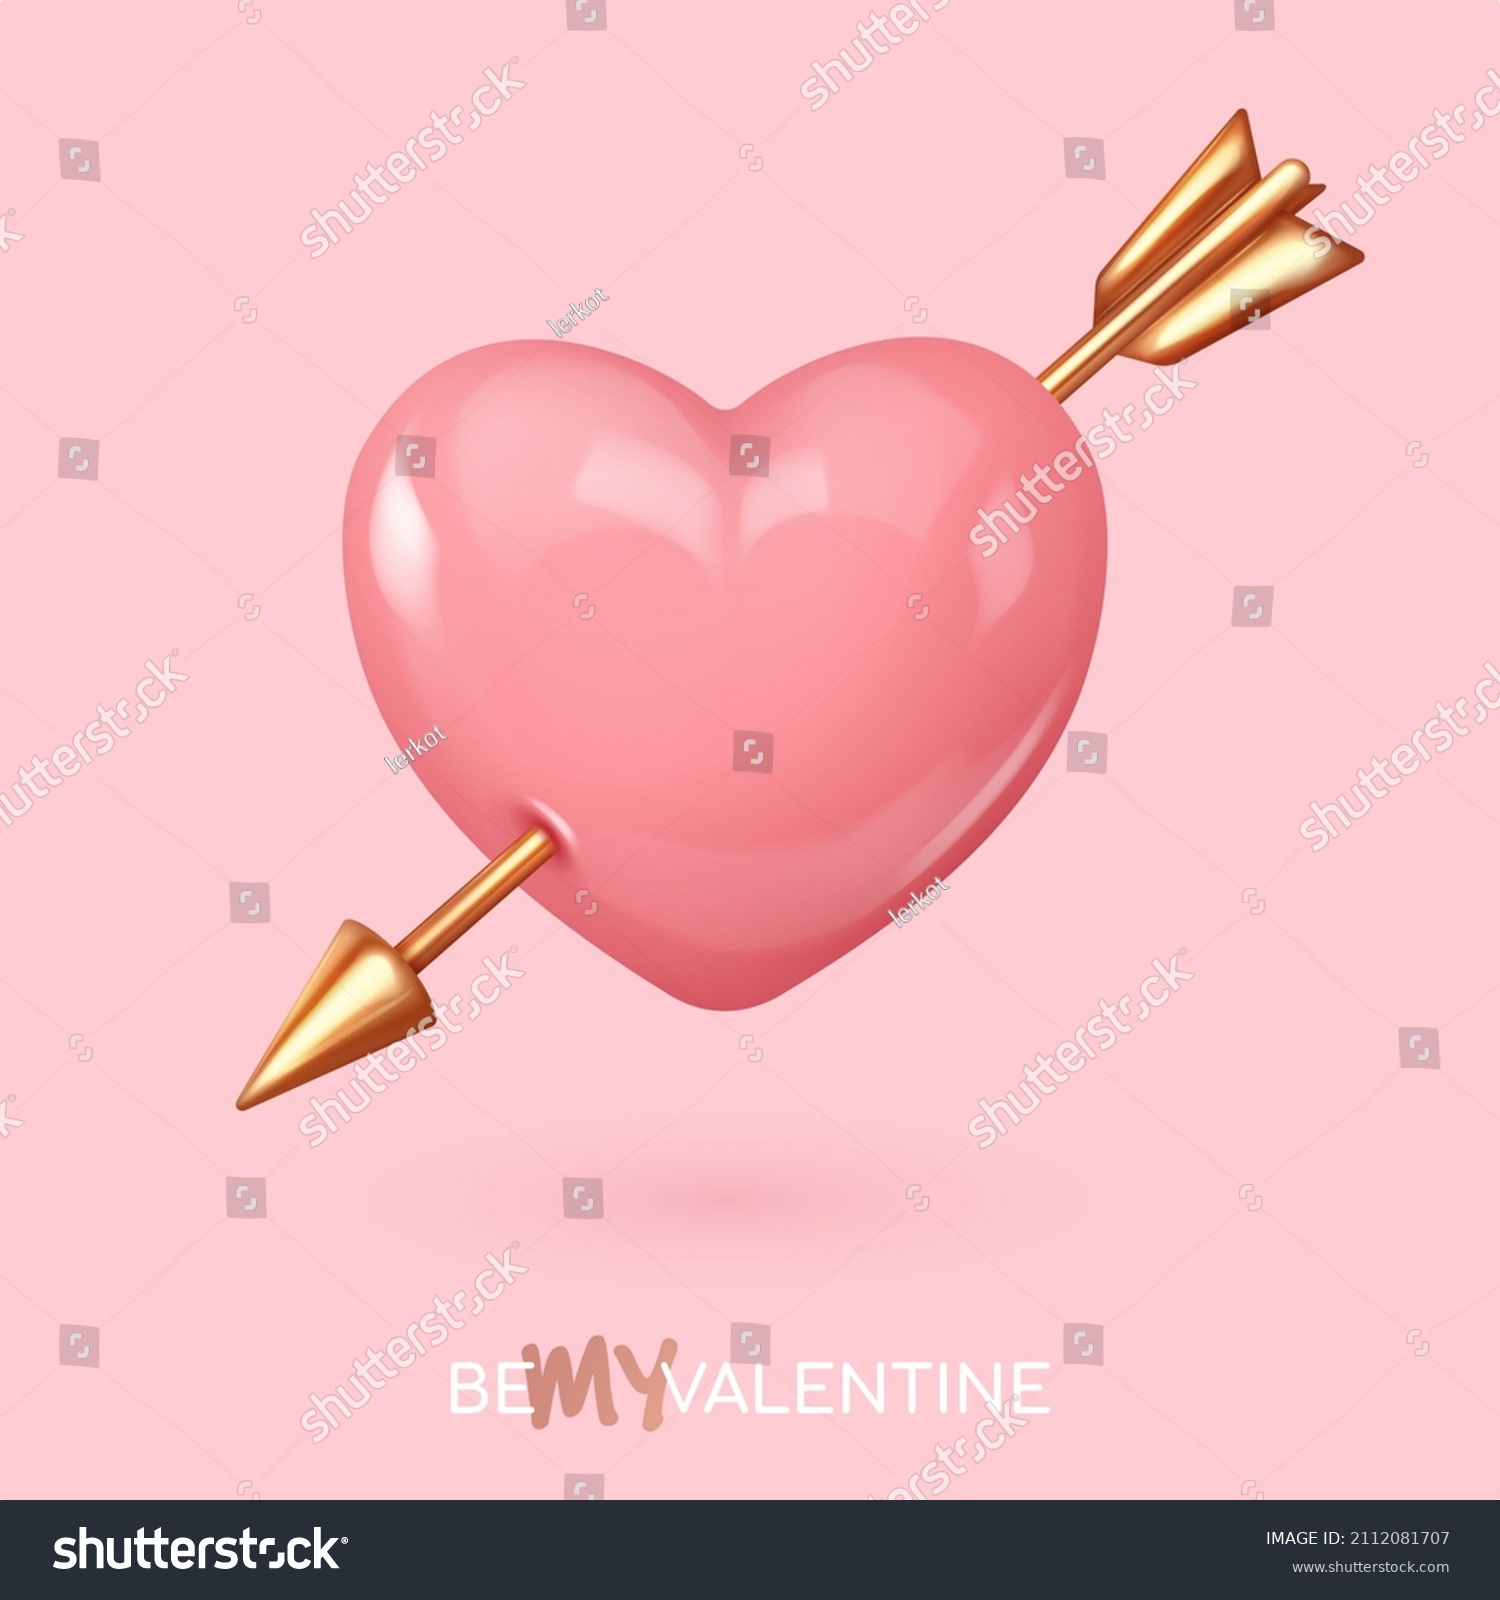 SVG of Realistic pink glossy candy heart with golden arrow. Look like 3d. Symbol of love. Be my Valentine. Vector illustration for card, party, design, flyer, poster, decor, banner, web, advertising. svg